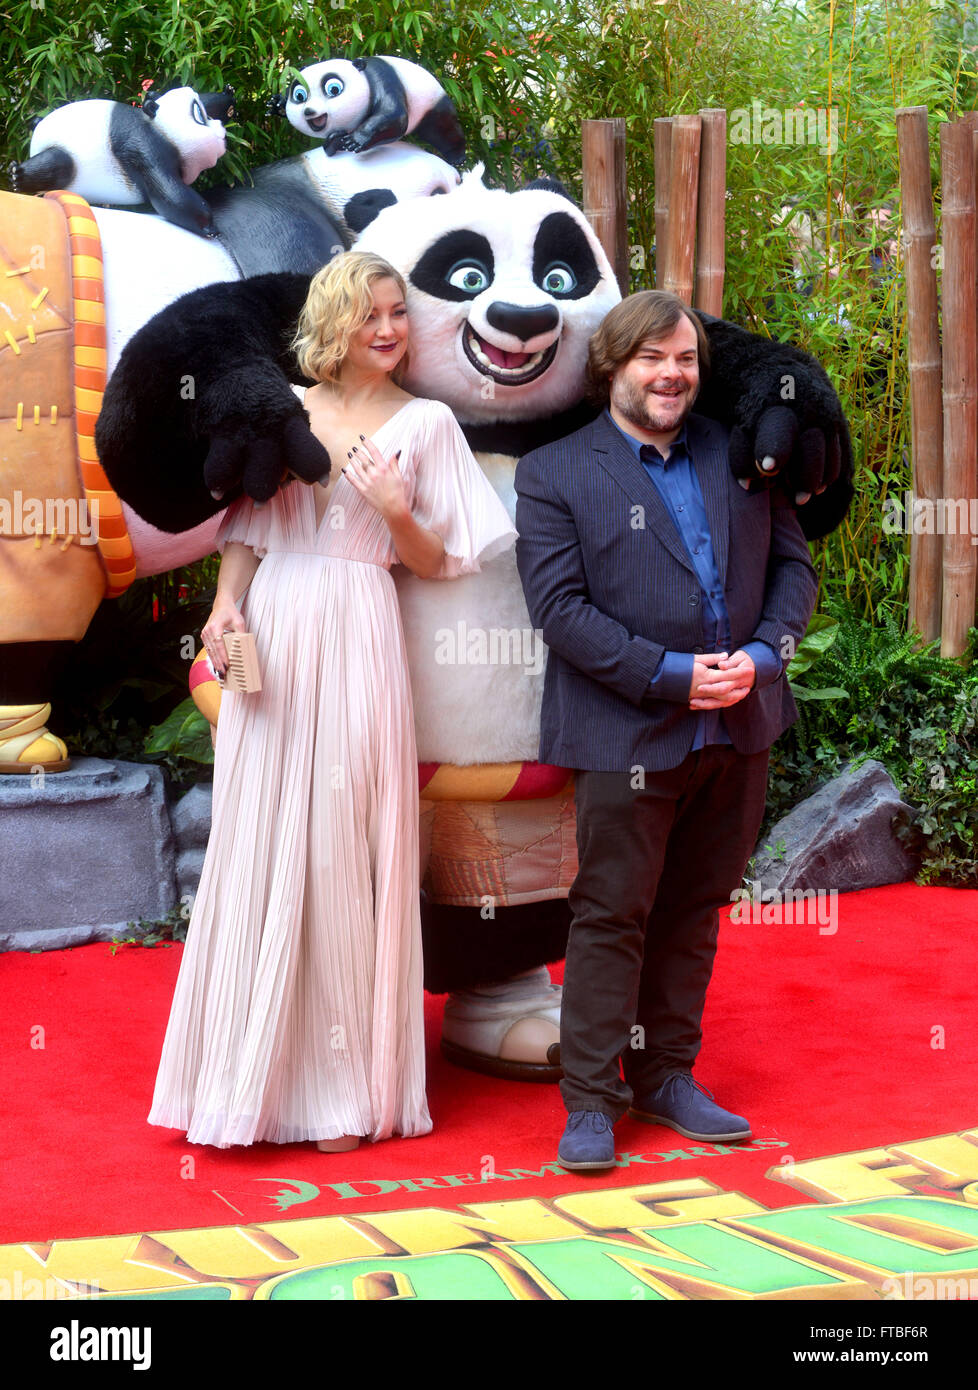 Actor Jack Blake attends the Premiere of Kung Fu Panda 3, in News Photo  - Getty Images